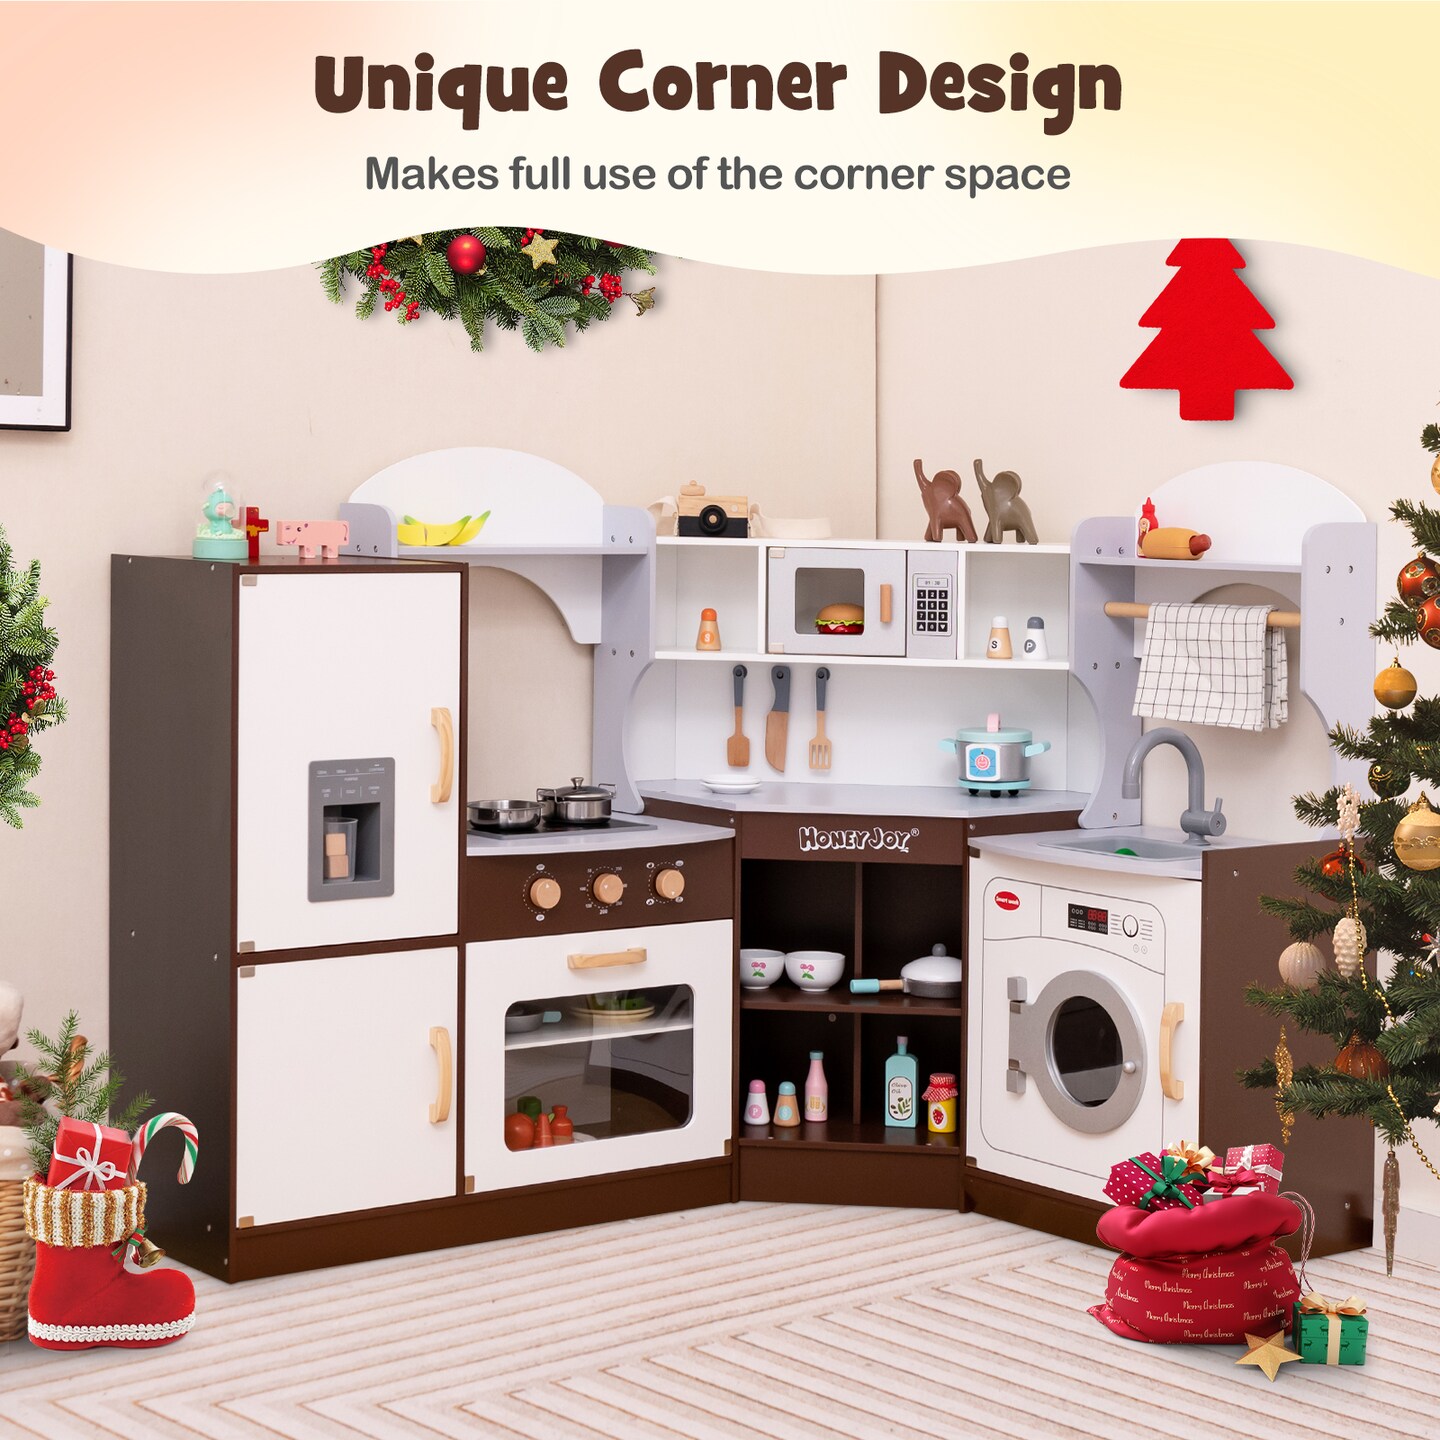 Honeyjoy Corner Play Kitchen with Ice Maker Microwave Oven for Kids 3+ Years Old Wooden Toy